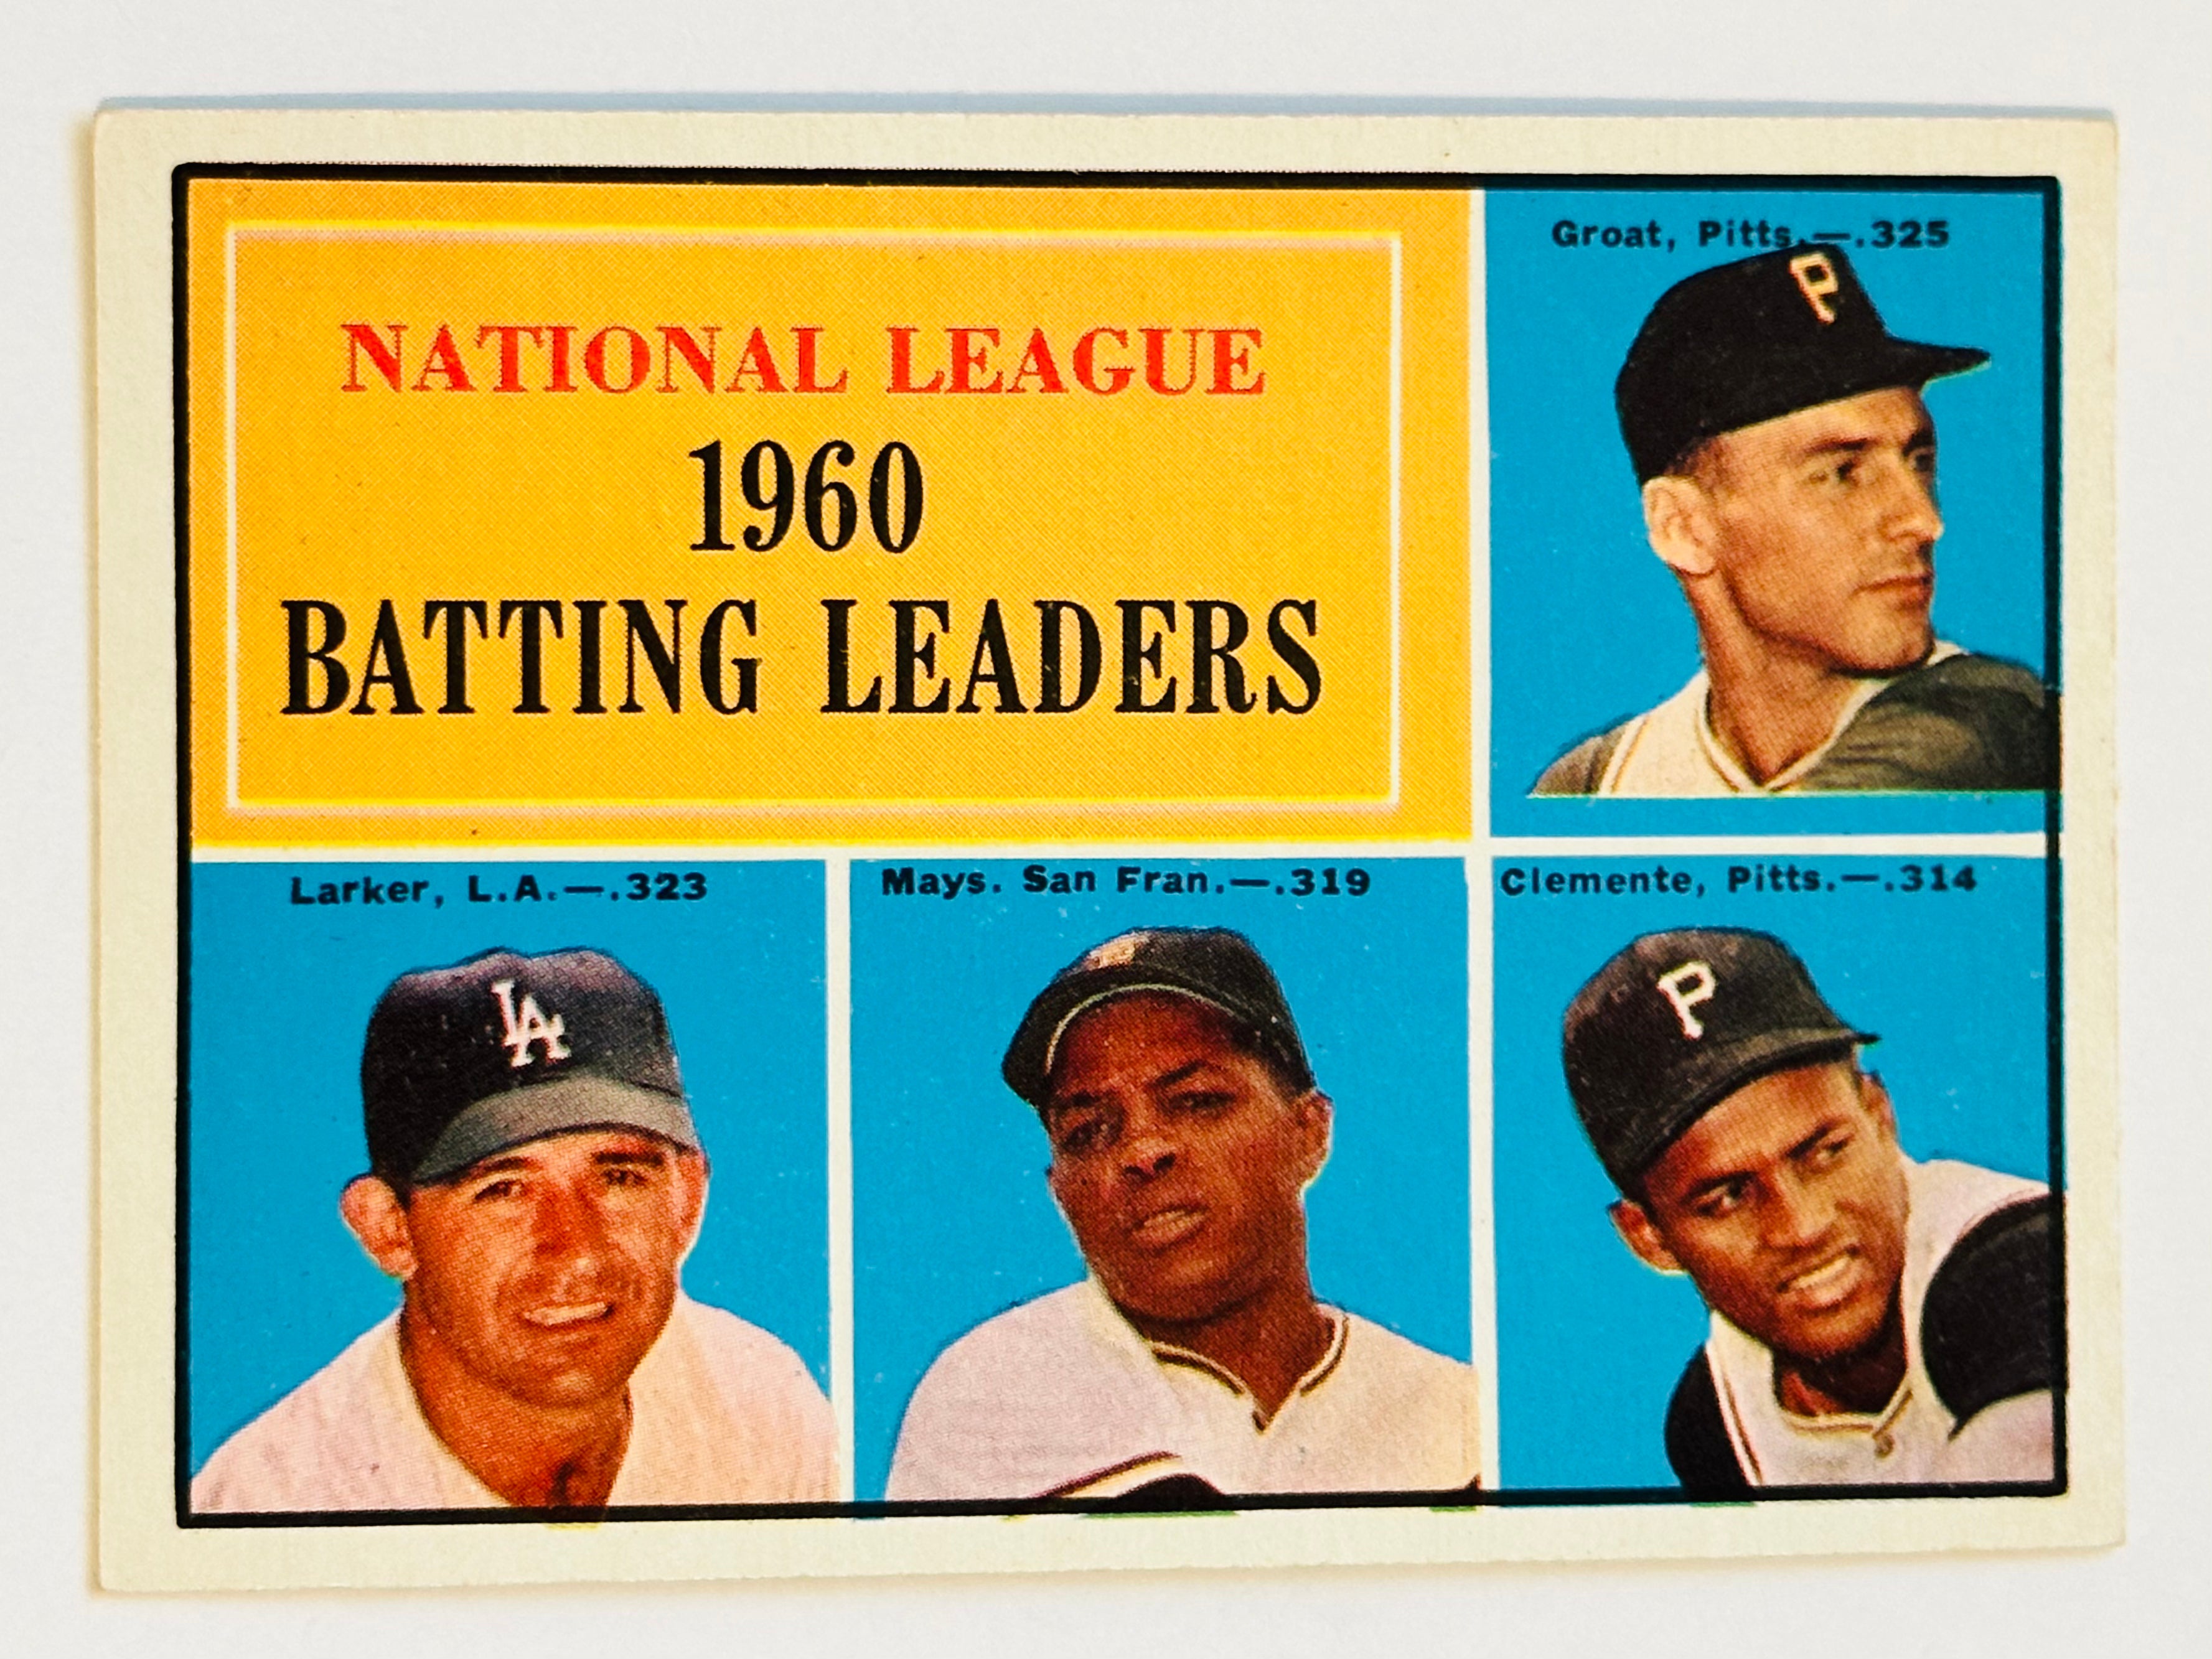 1961 Topps Willie Mays and Roberto Clemente batting champs baseball card